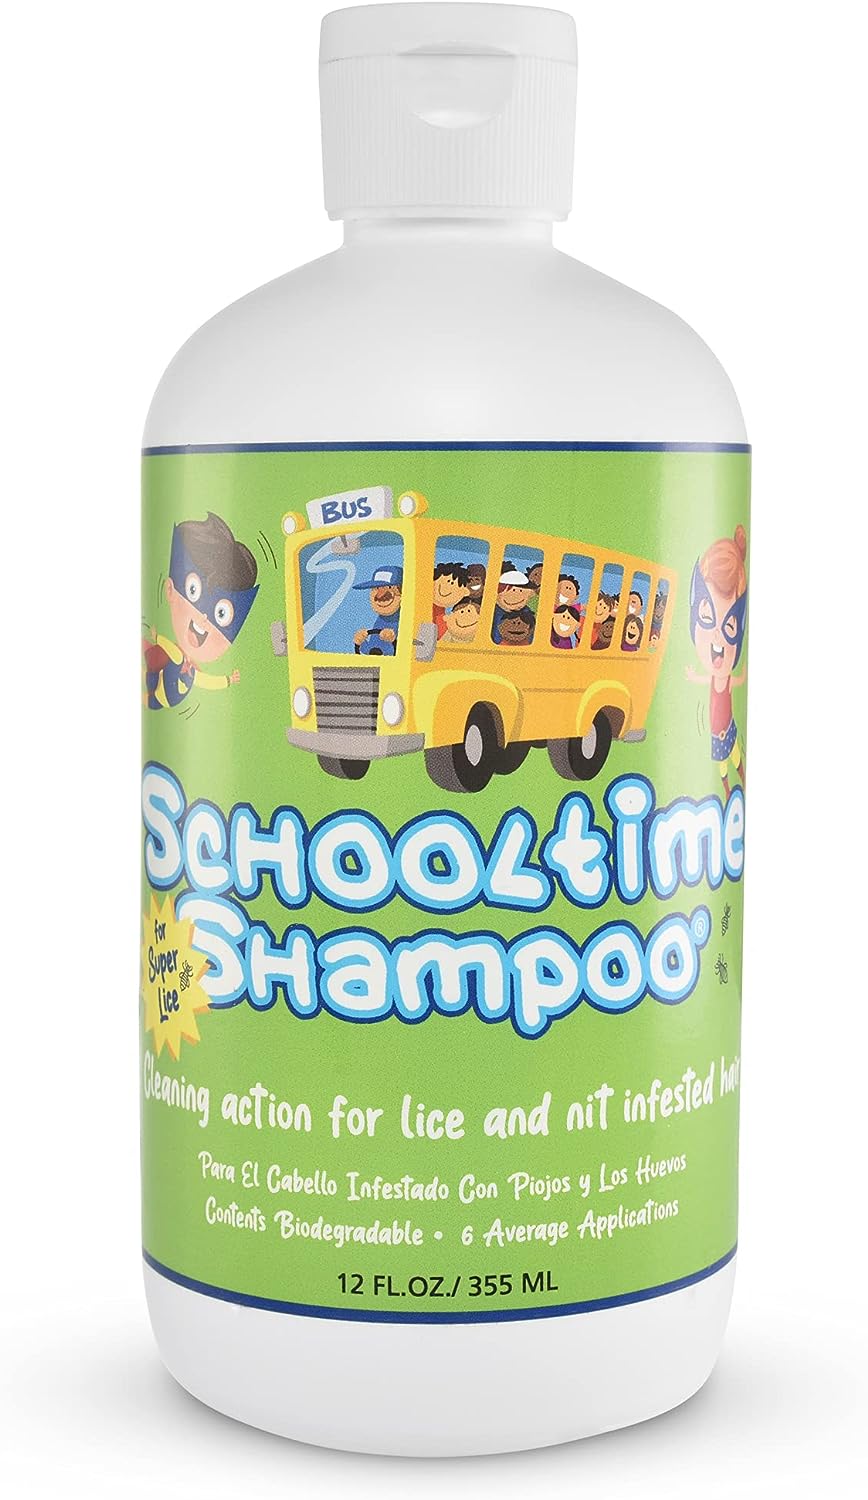 Schooltime shampoo, best lice prevention shampoo